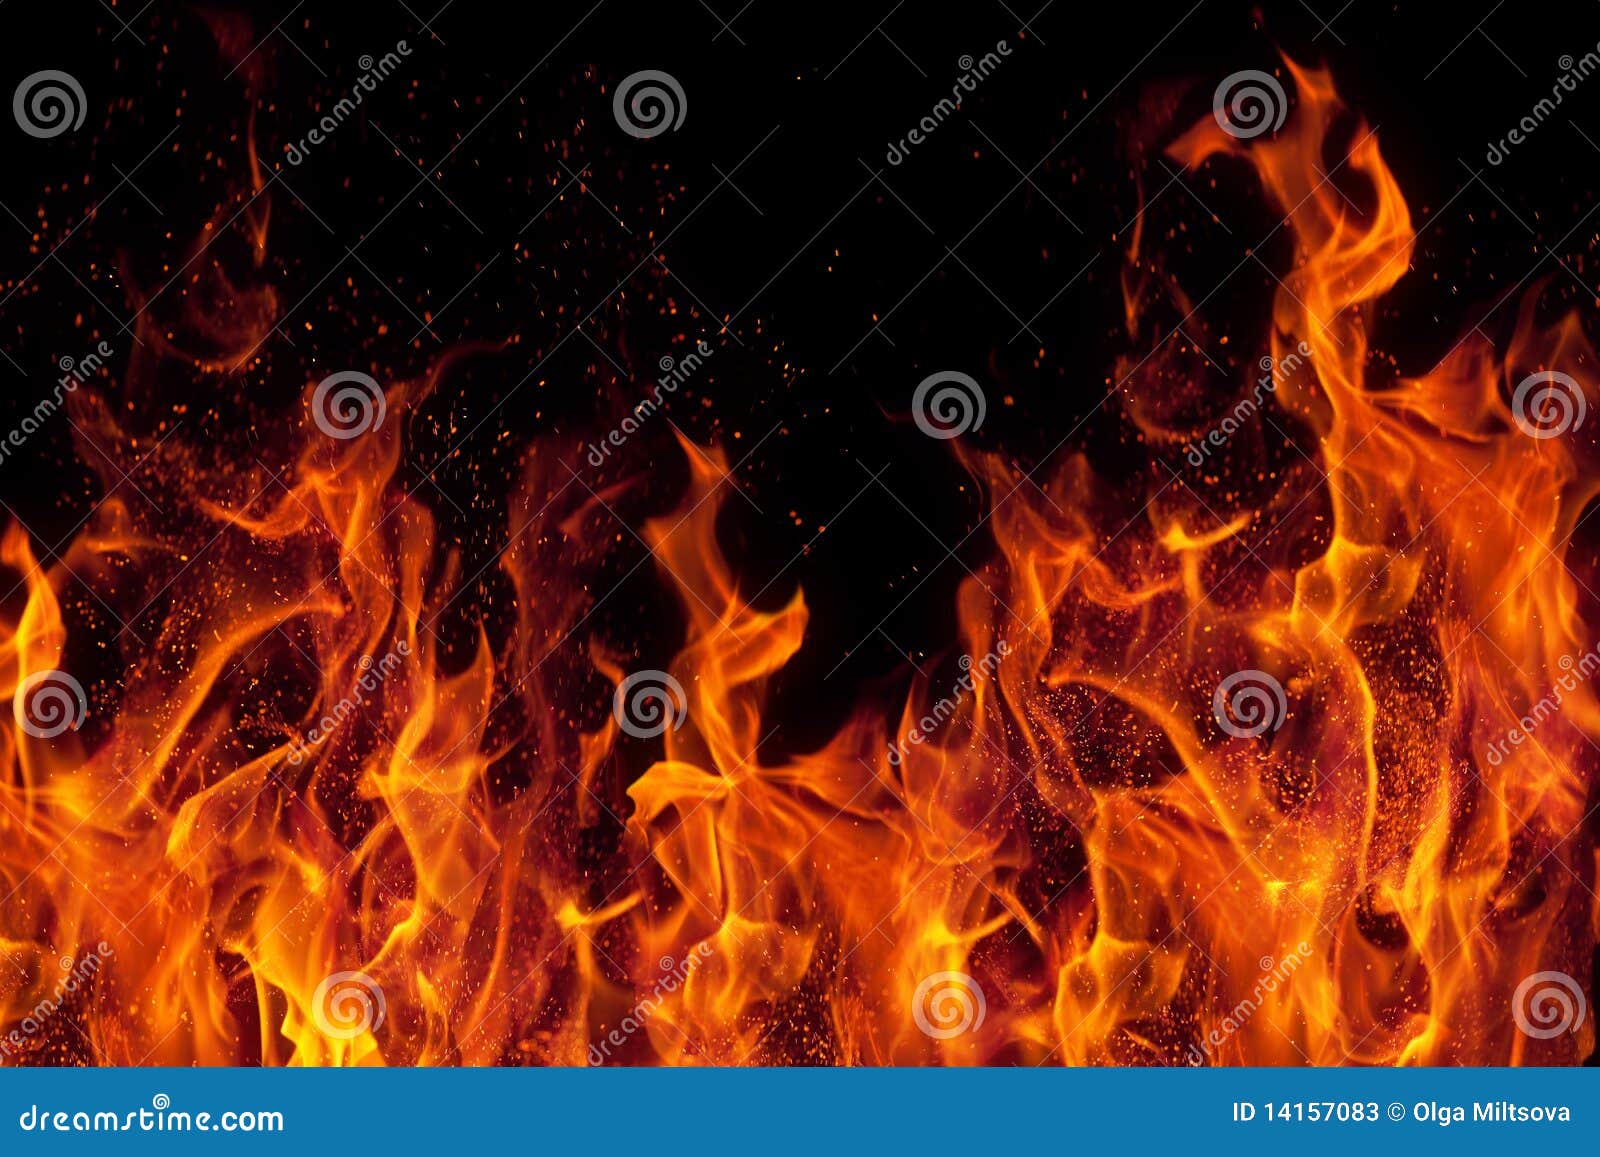 fire  over black background